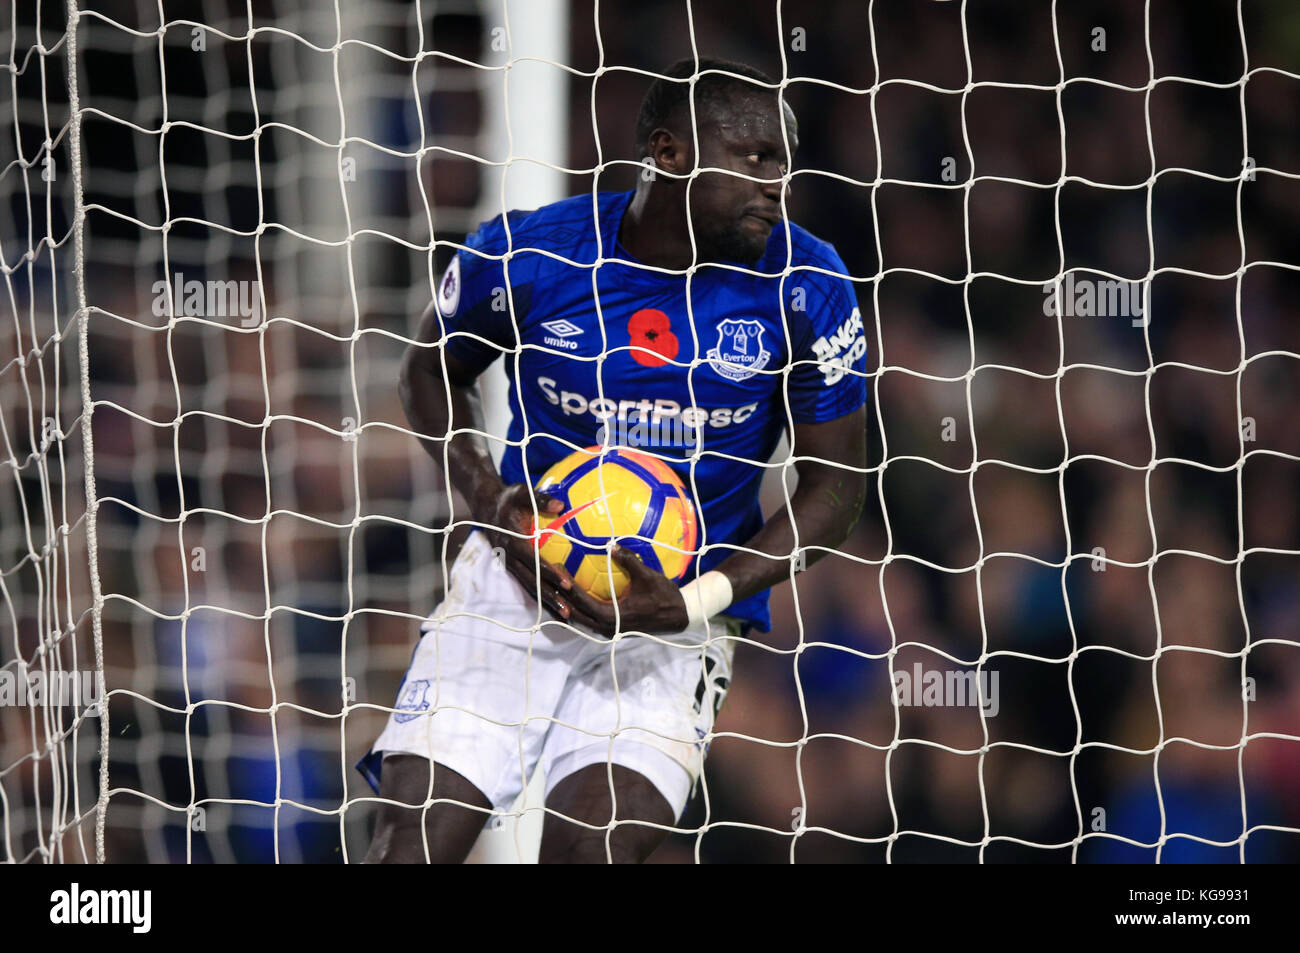 Everton's Oumar Niasse grabs the ball after scoring his side's first goal of the game during the Premier League match at Goodison Park, Liverpool. Stock Photo